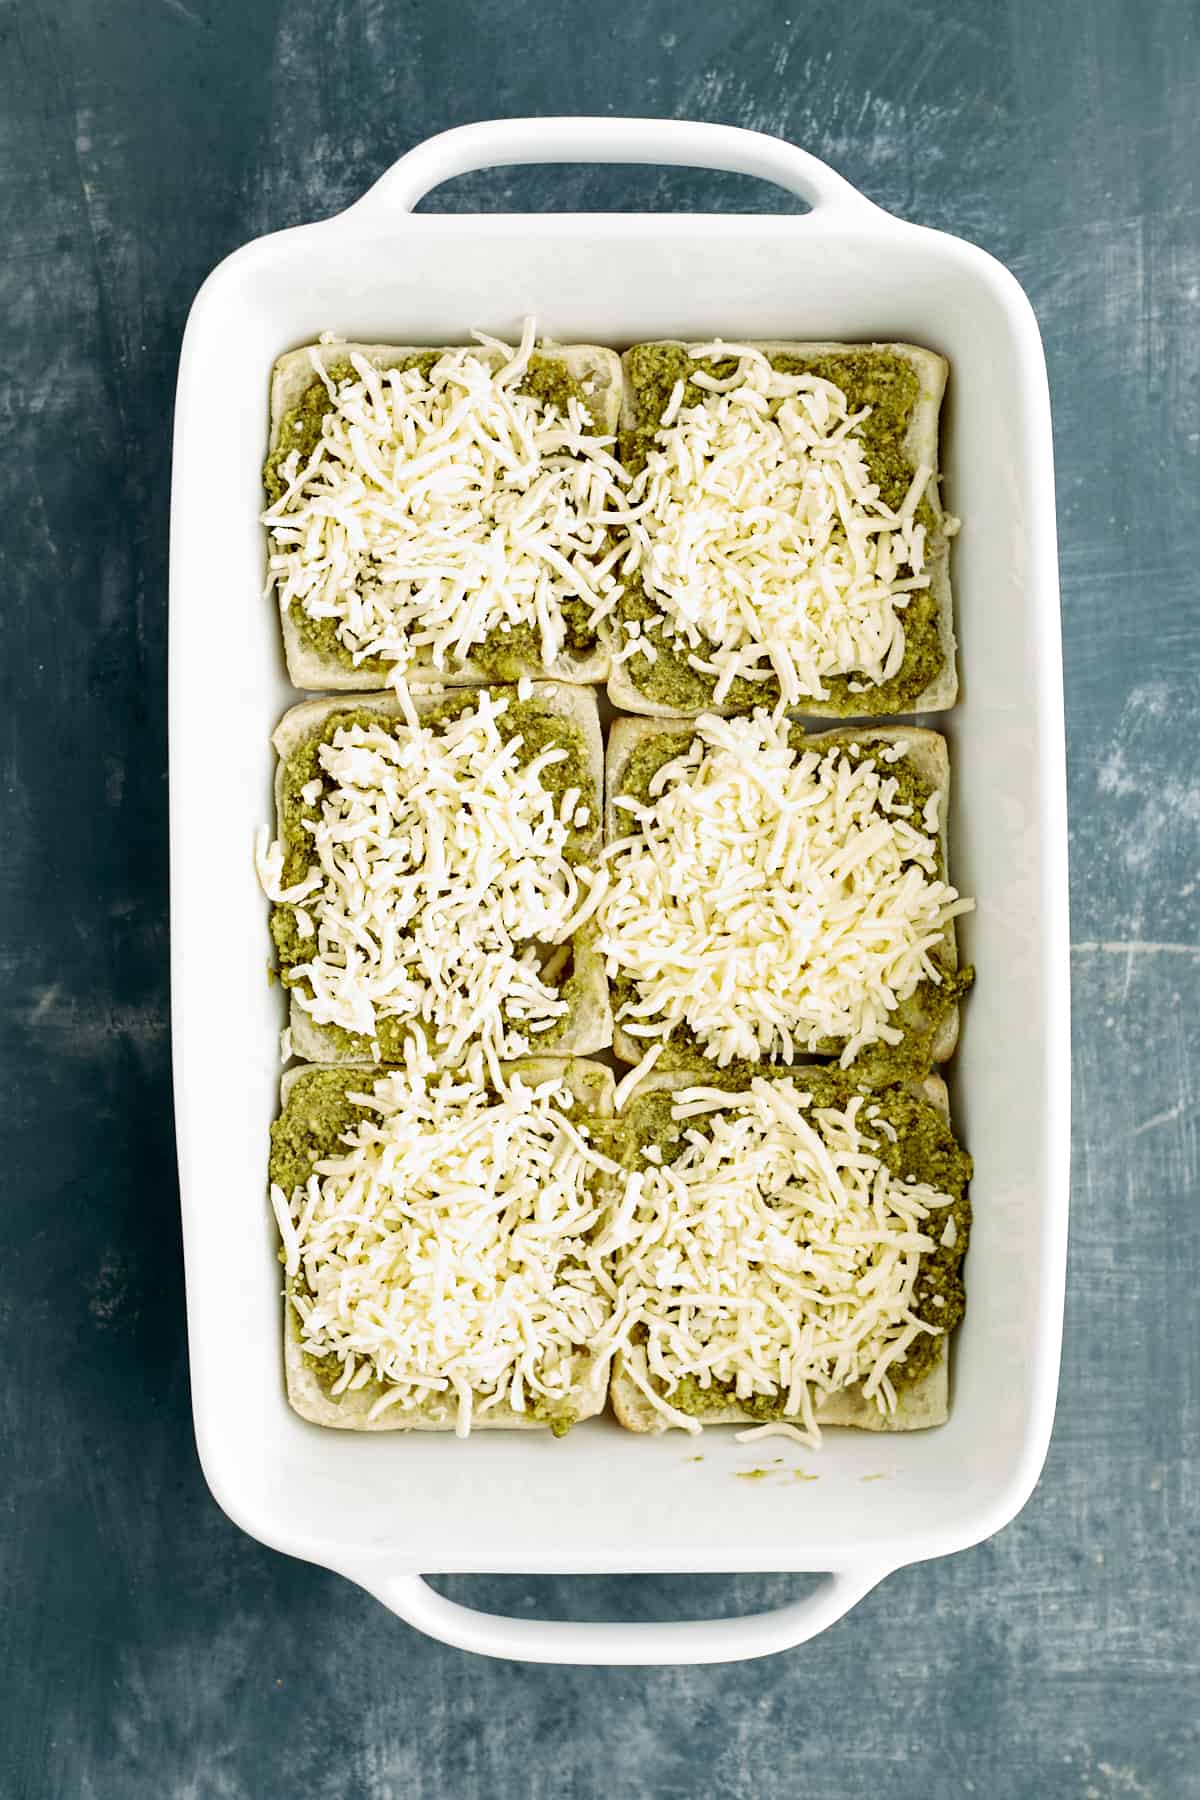 sliced bread in a baking dish topped with pesto and cheese